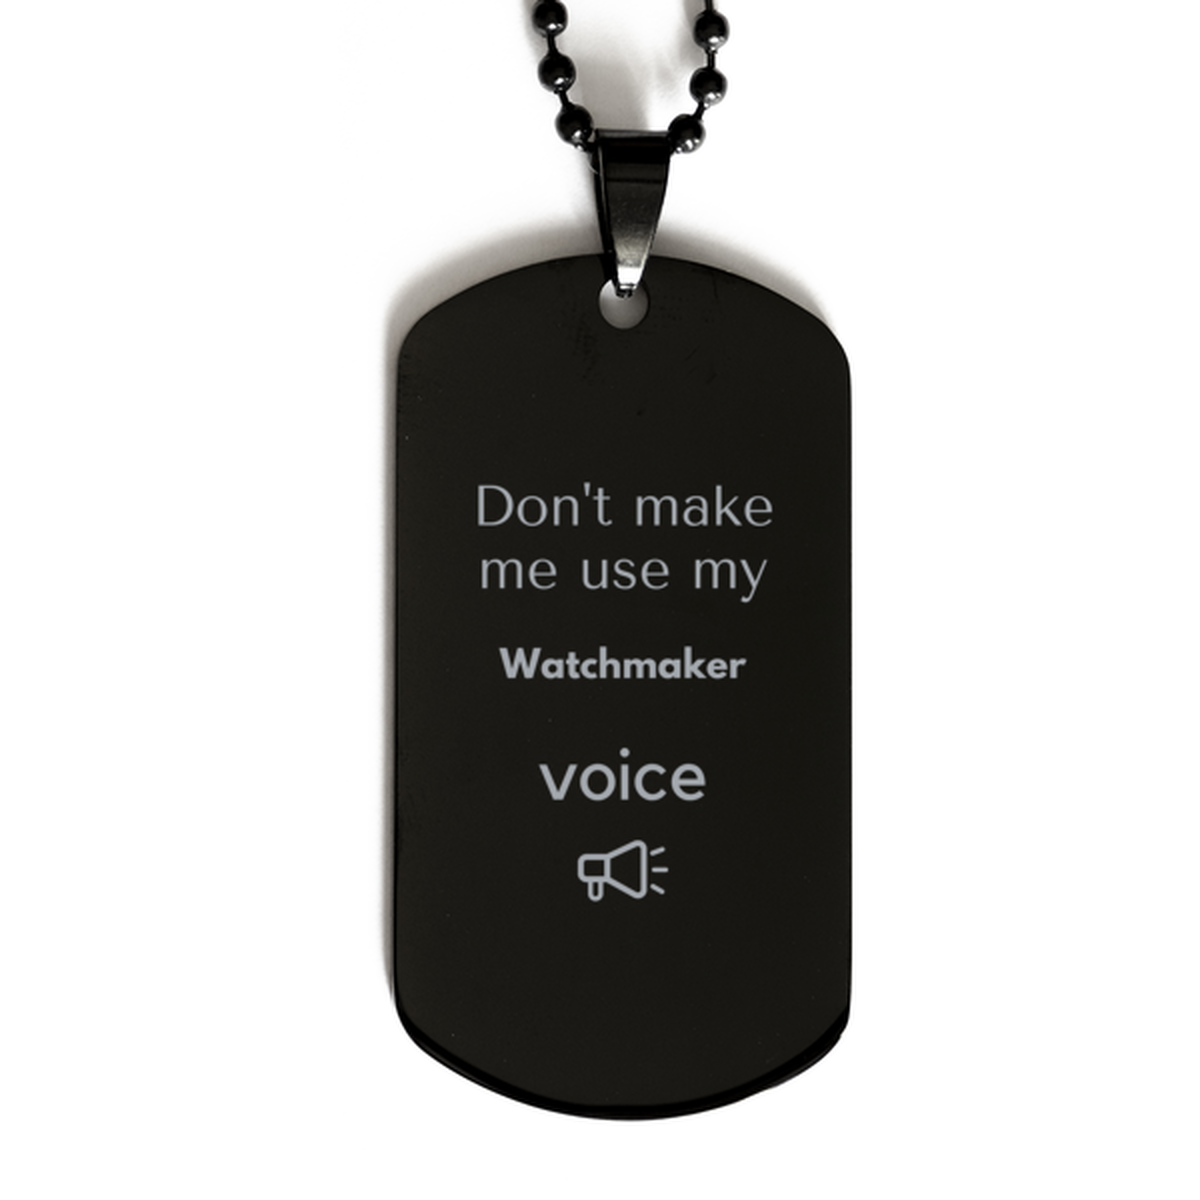 Don't make me use my Watchmaker voice, Sarcasm Watchmaker Gifts, Christmas Watchmaker Black Dog Tag Birthday Unique Gifts For Watchmaker Coworkers, Men, Women, Colleague, Friends